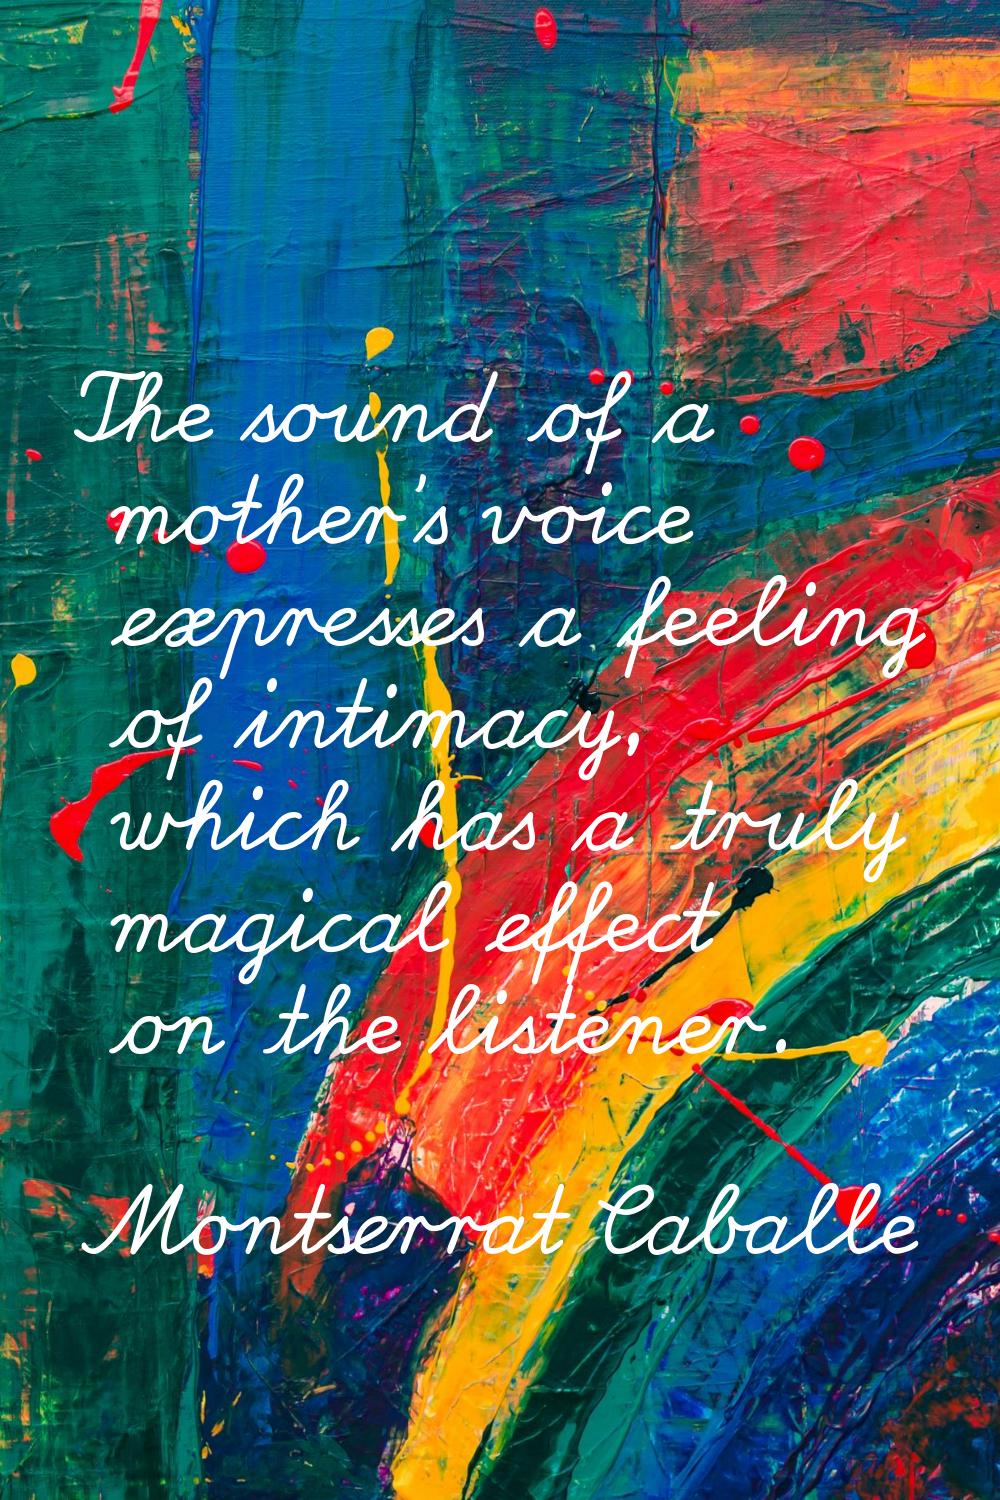 The sound of a mother's voice expresses a feeling of intimacy, which has a truly magical effect on 